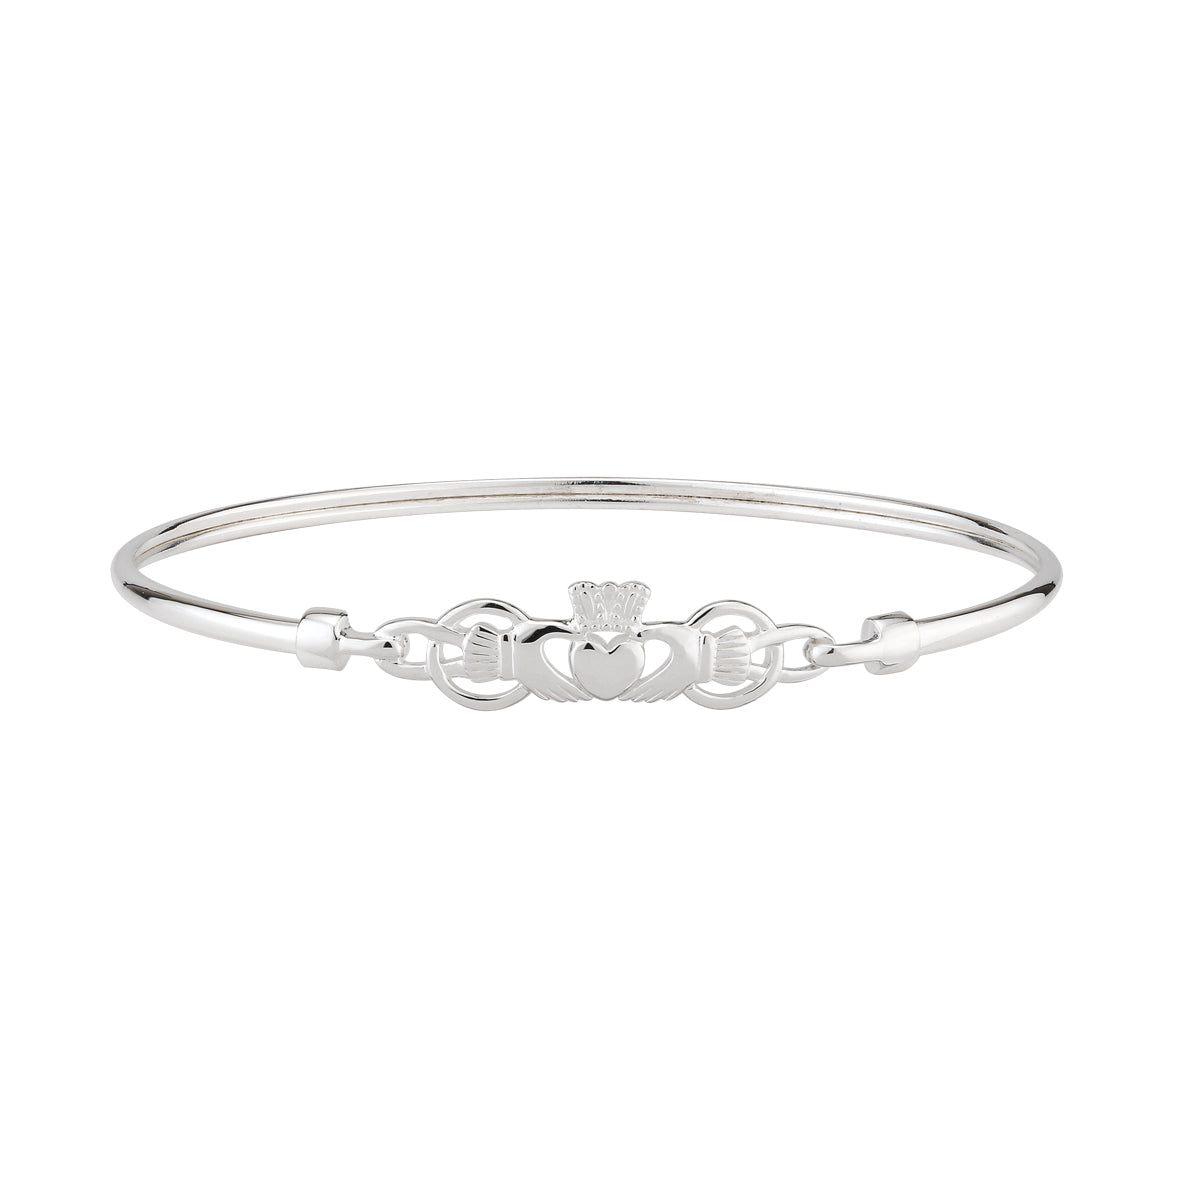 sterling silver claddagh bangle s5795 from Solvar